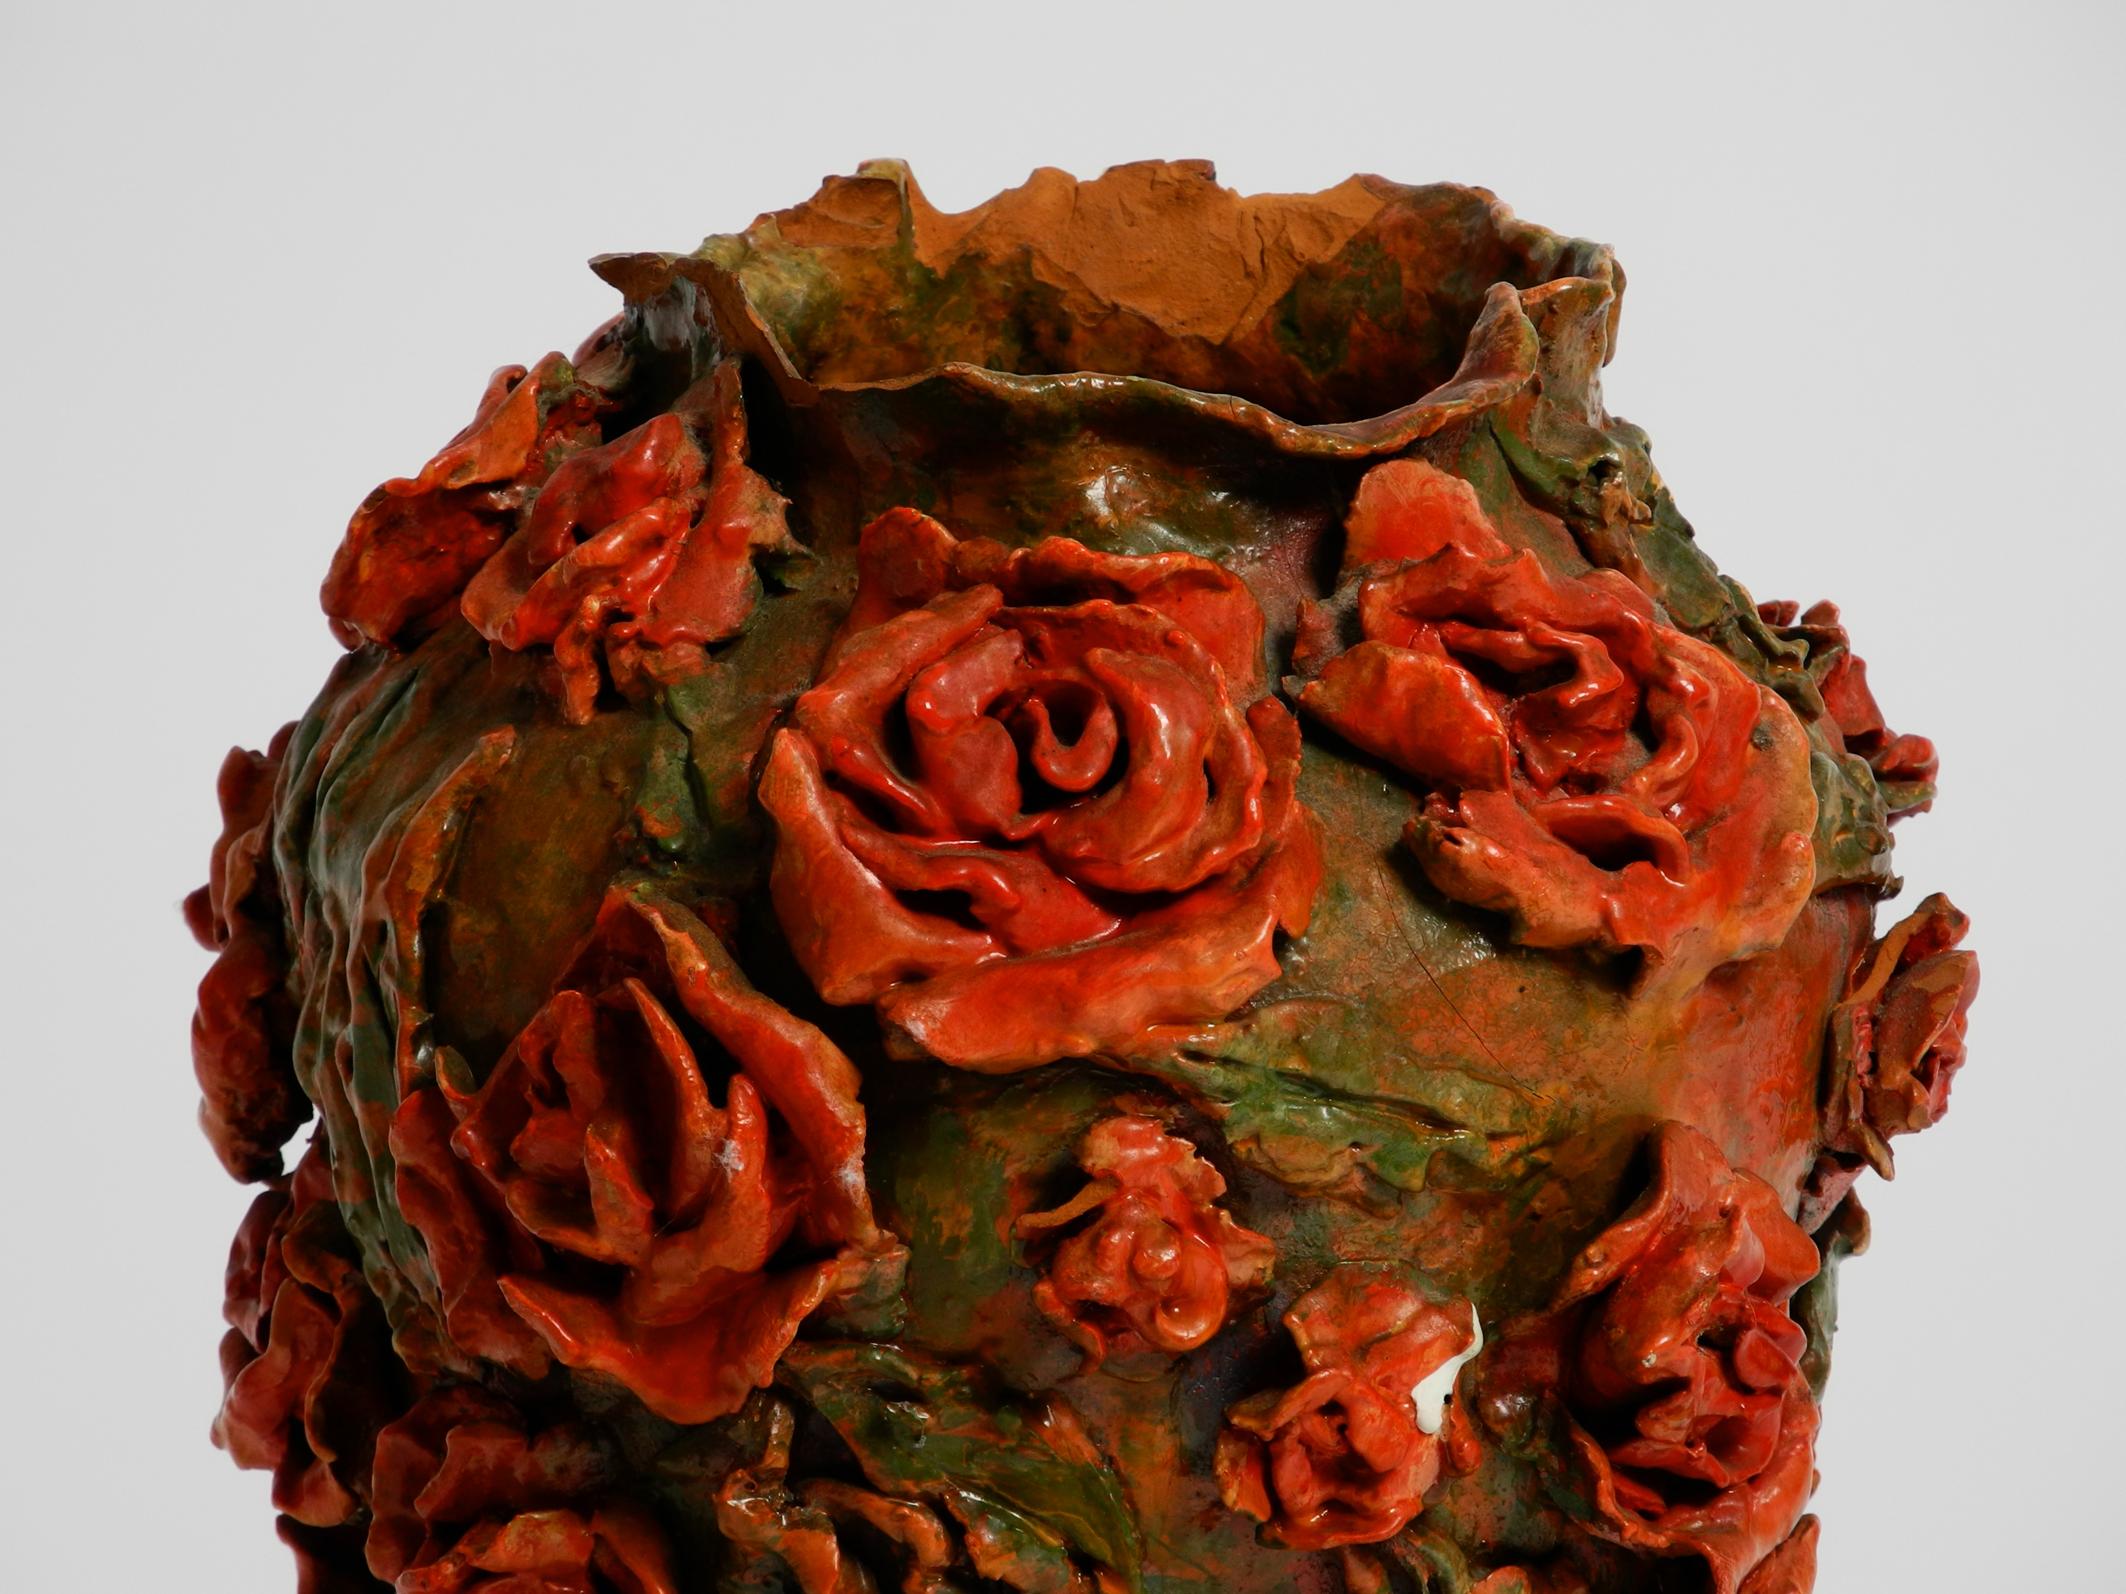 Early 20th Century Handmade Clay Vase in Green-Brown with Red Roses by Rosie Fridrin Rieger 1918 For Sale